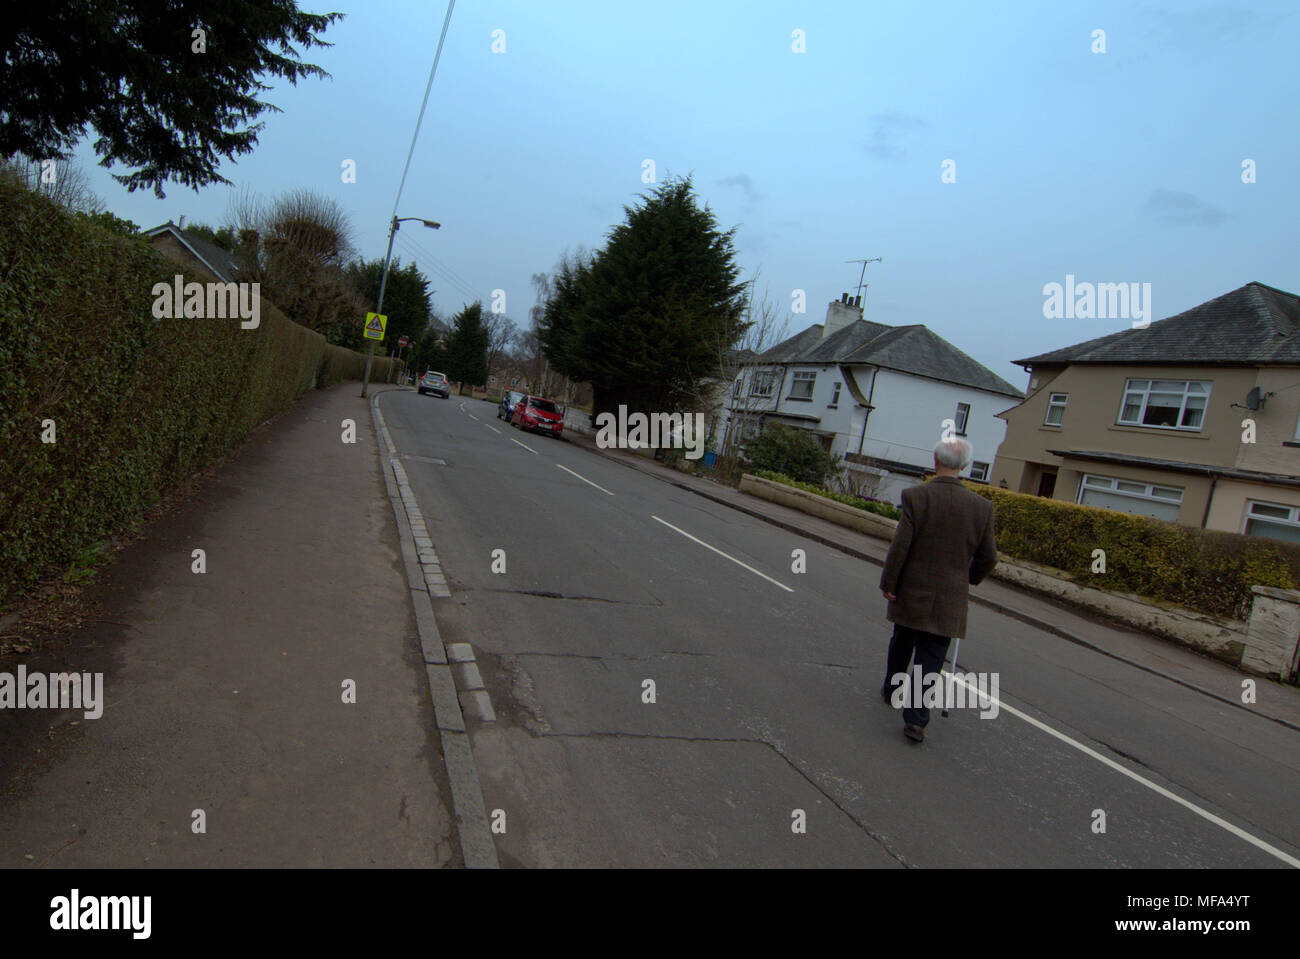 wide angle street view of old man crossing middle of  road with walking stick urban middle class housing Stock Photo